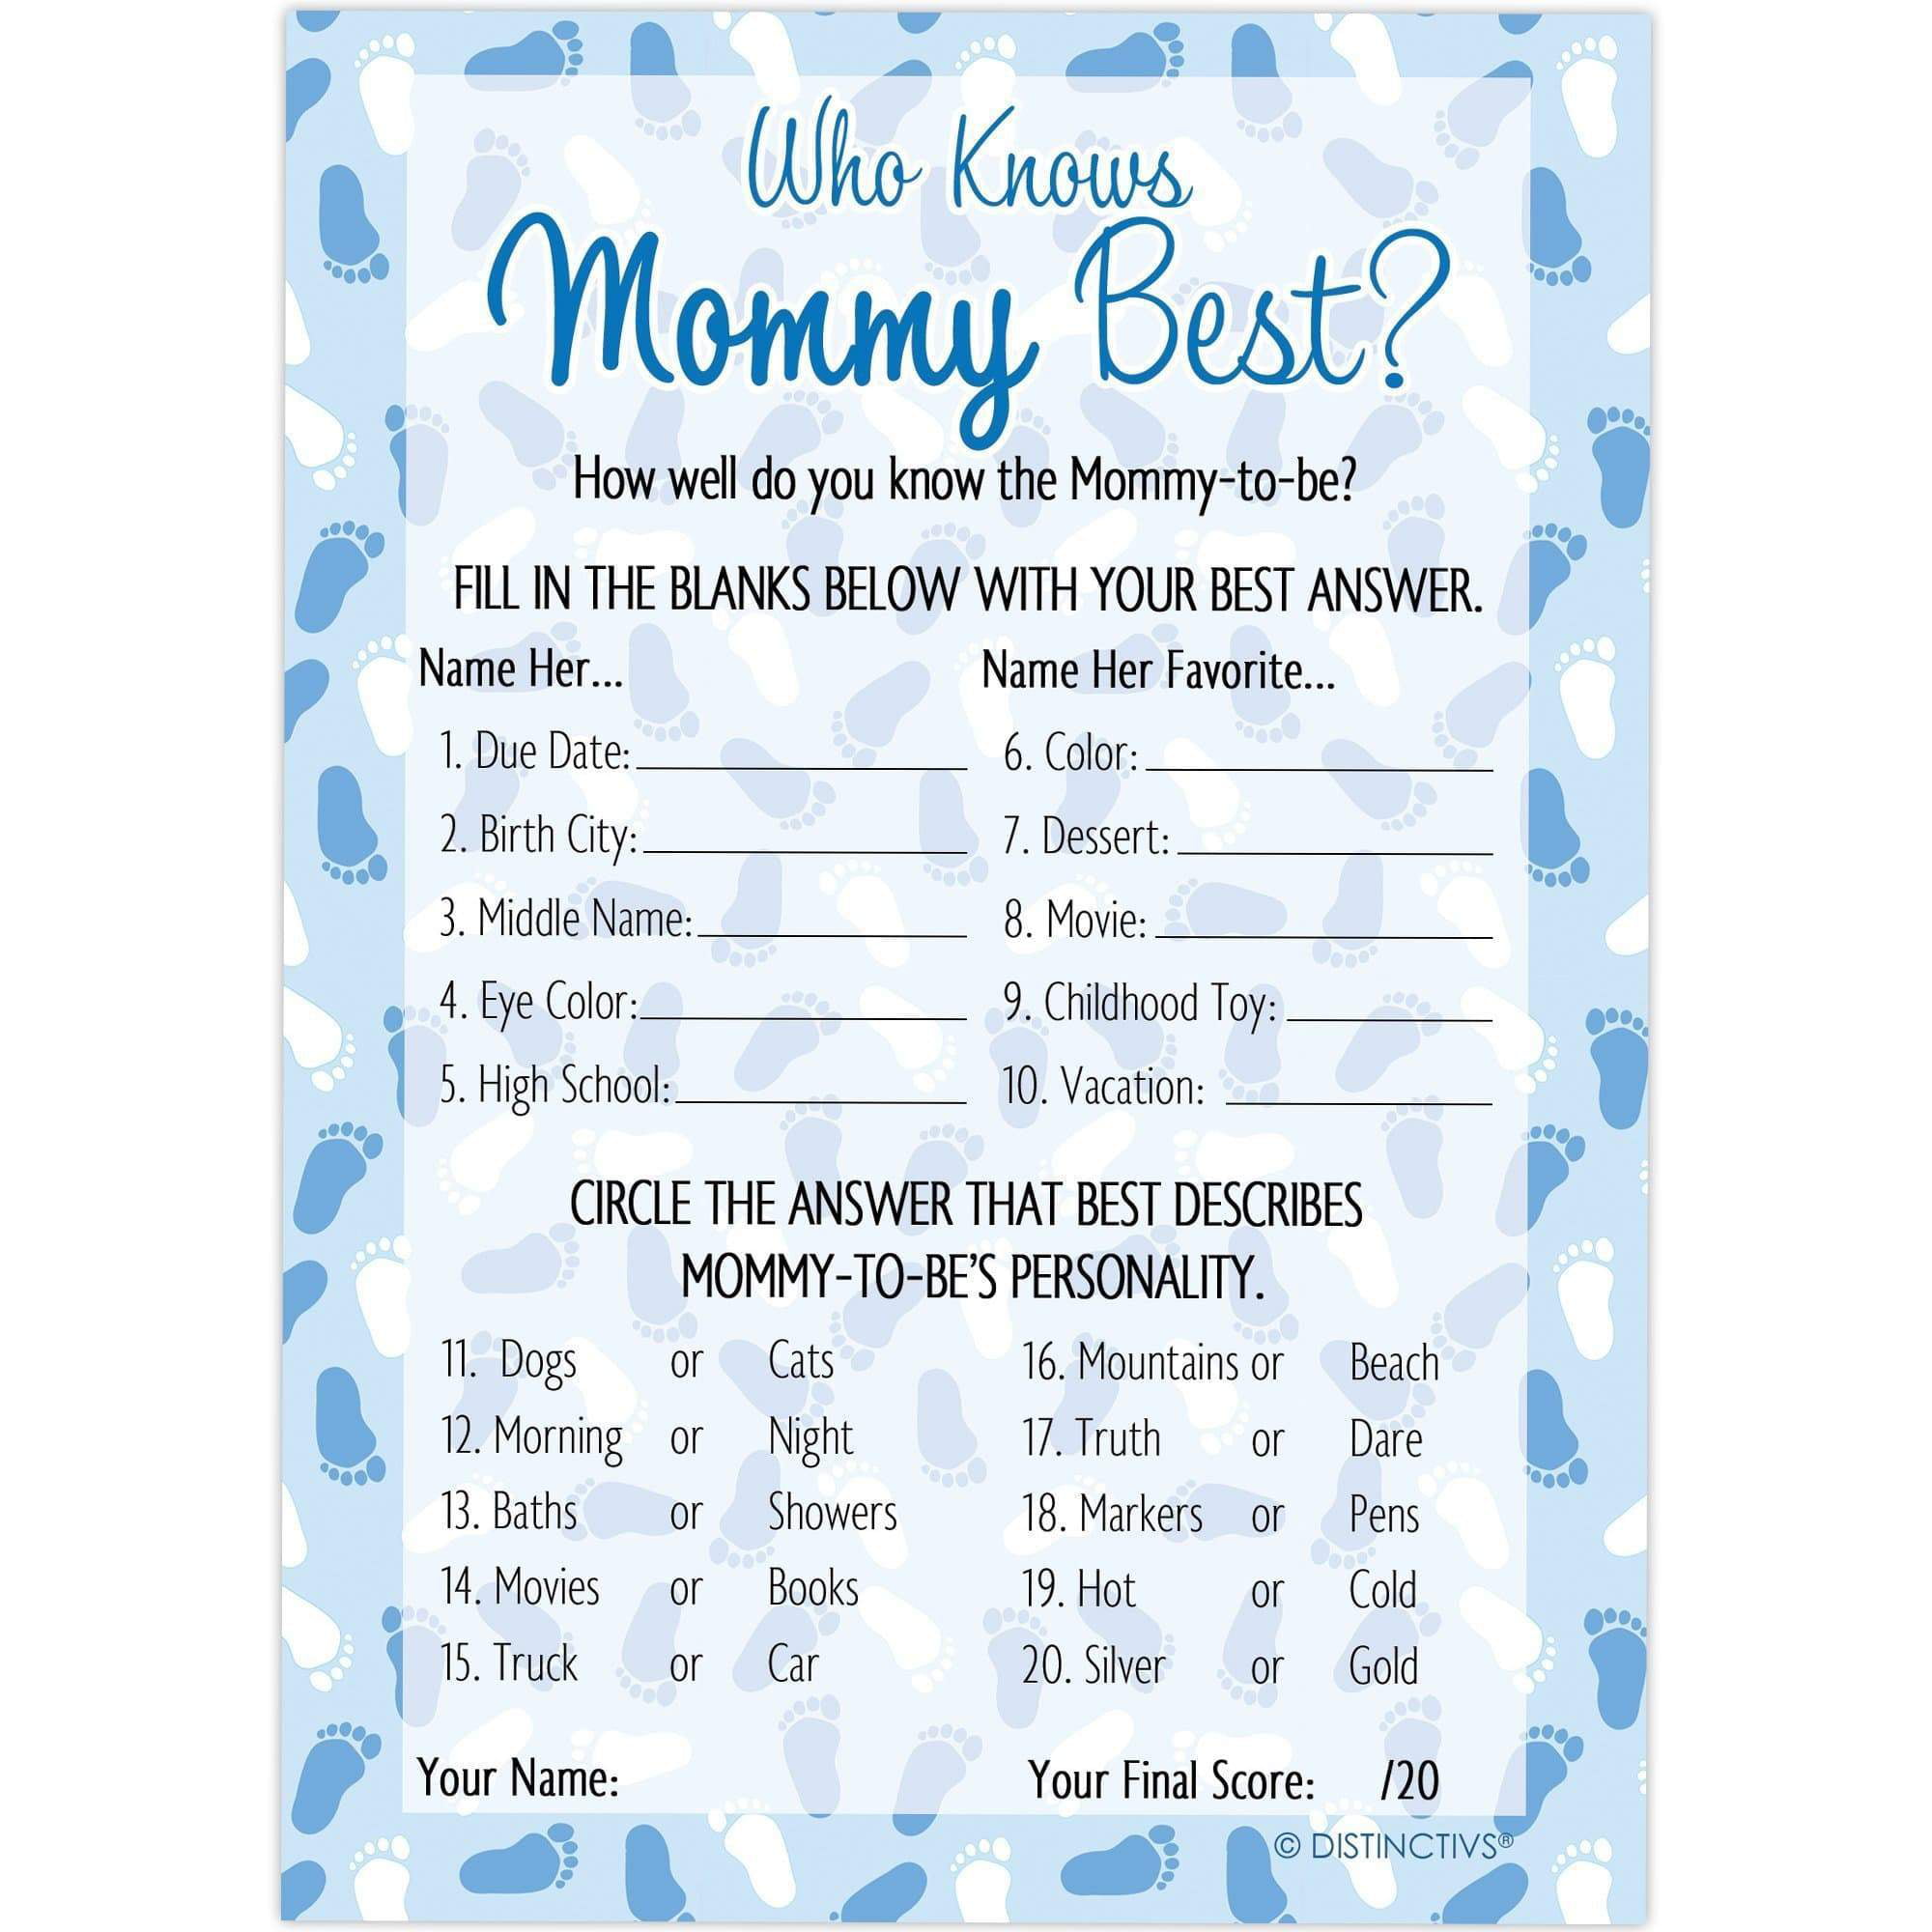 Baby Shower Games Scratch Cards Win a Prize Dares Games Fun 